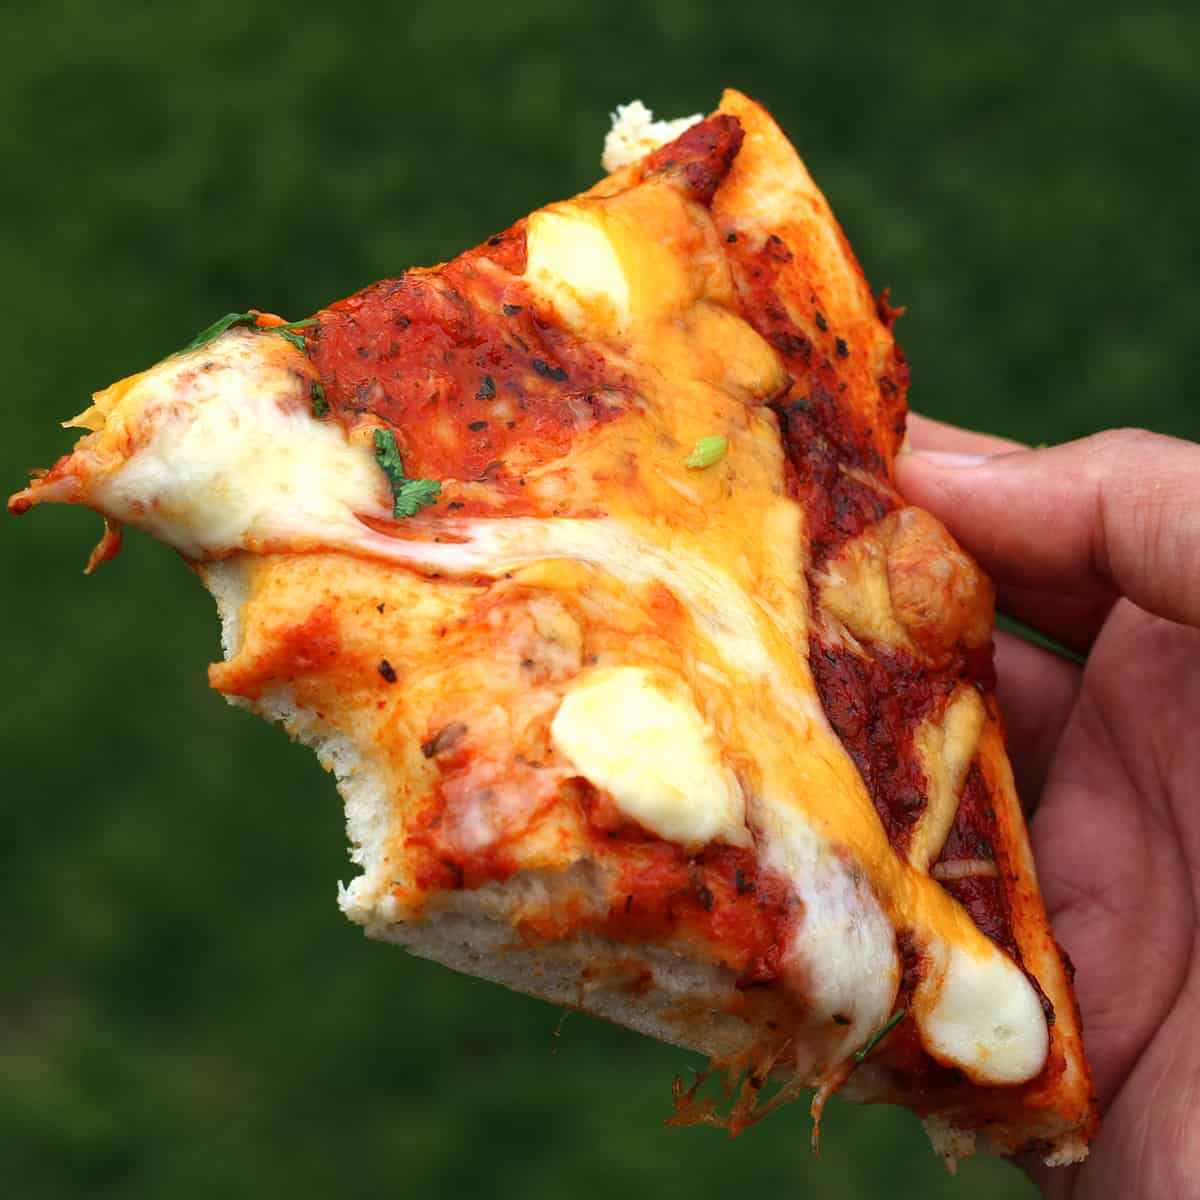 Best Homemade Cheese Pizza Recipe - Five Cheese Pizza Slices.